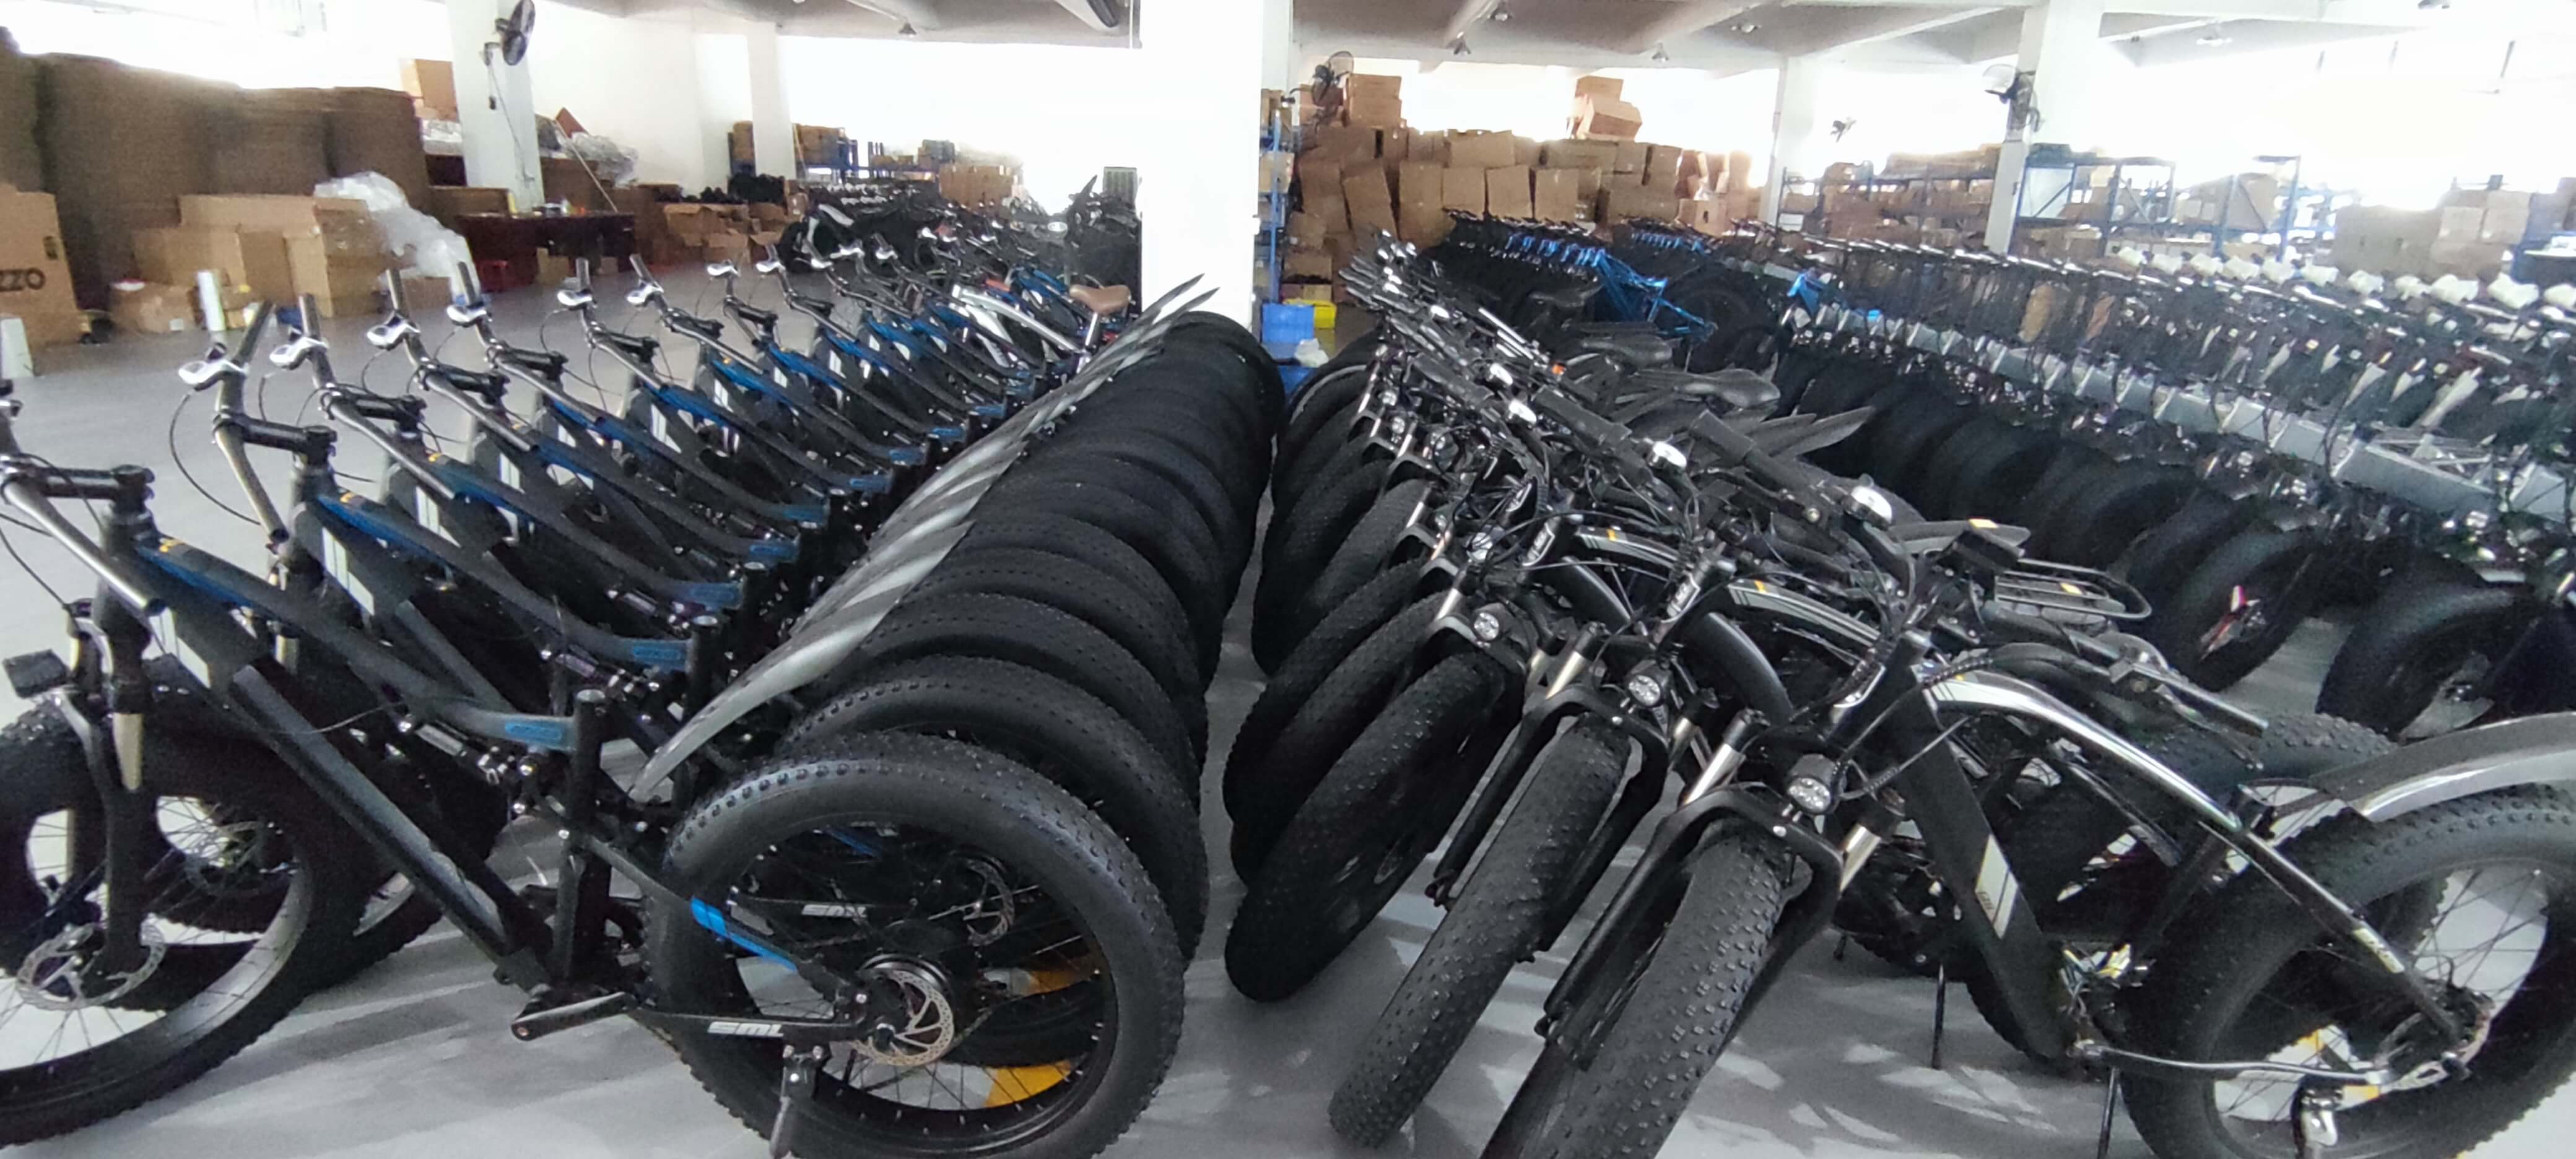 Shengmilo-bikes.com-is-the-only-manufacturer-of-Shengmilo-brand